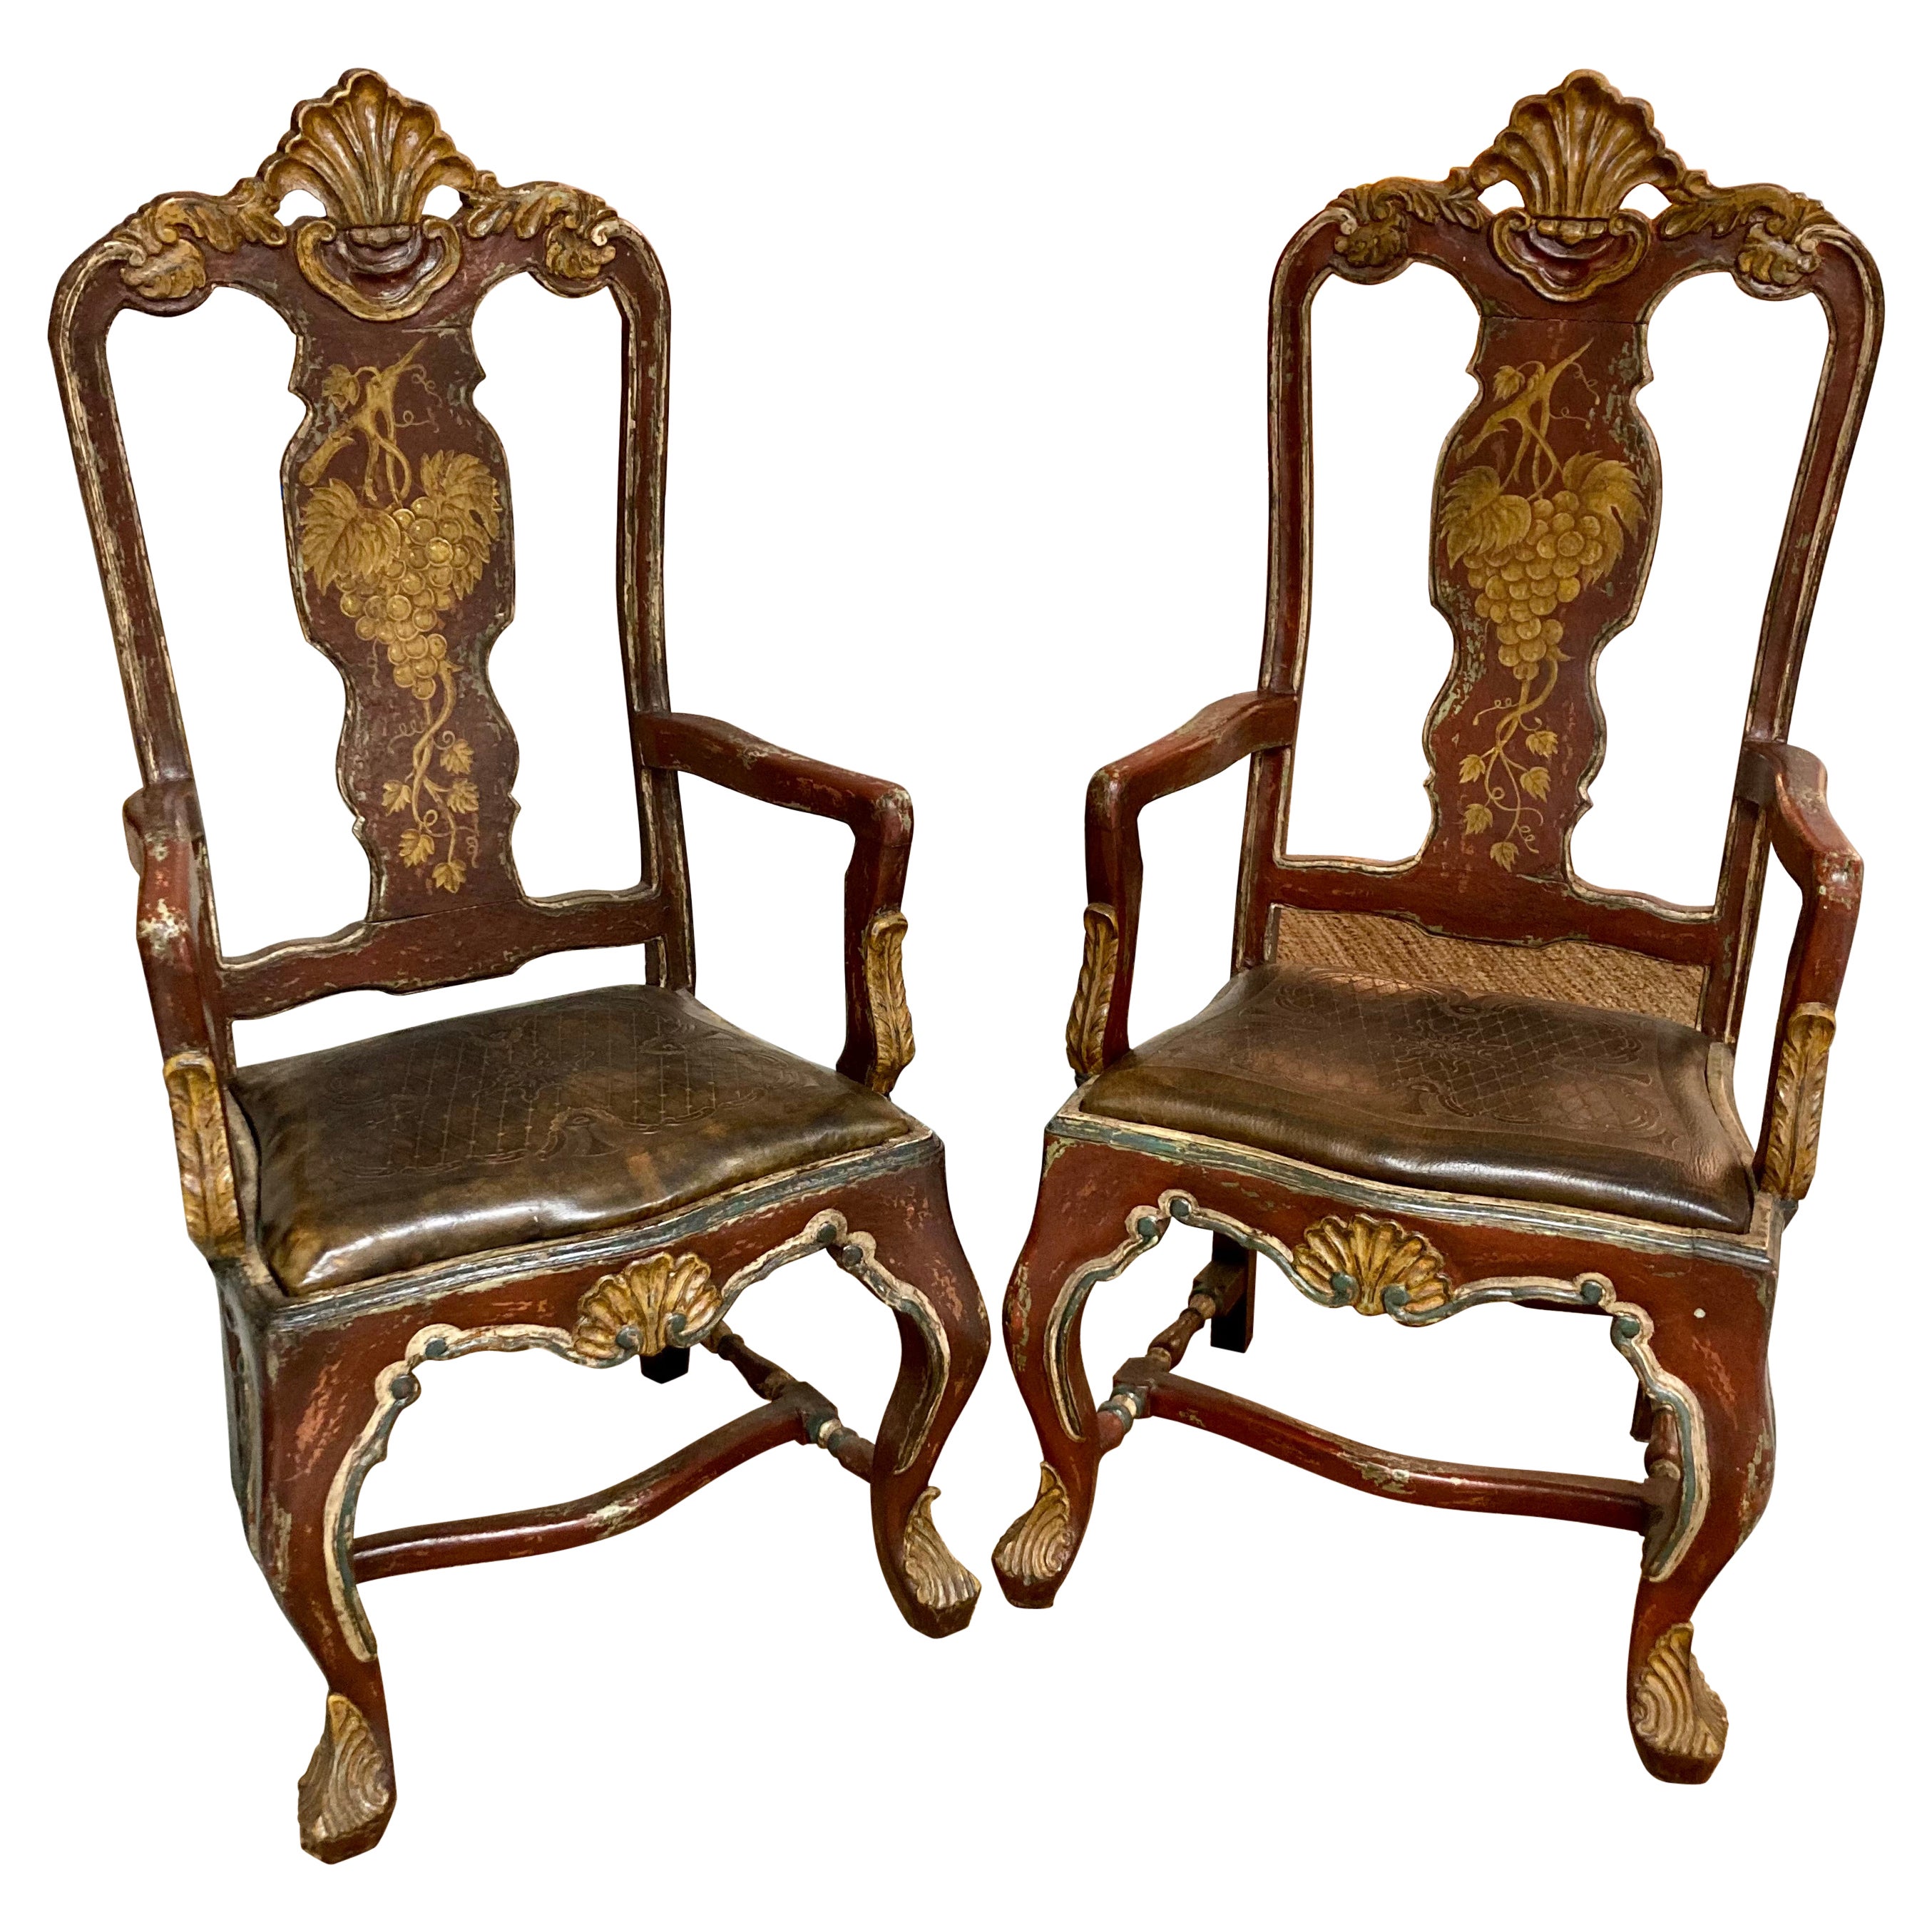 Venetian Arm Chairs With Original Painted Finish and Leather Seats, a Pair